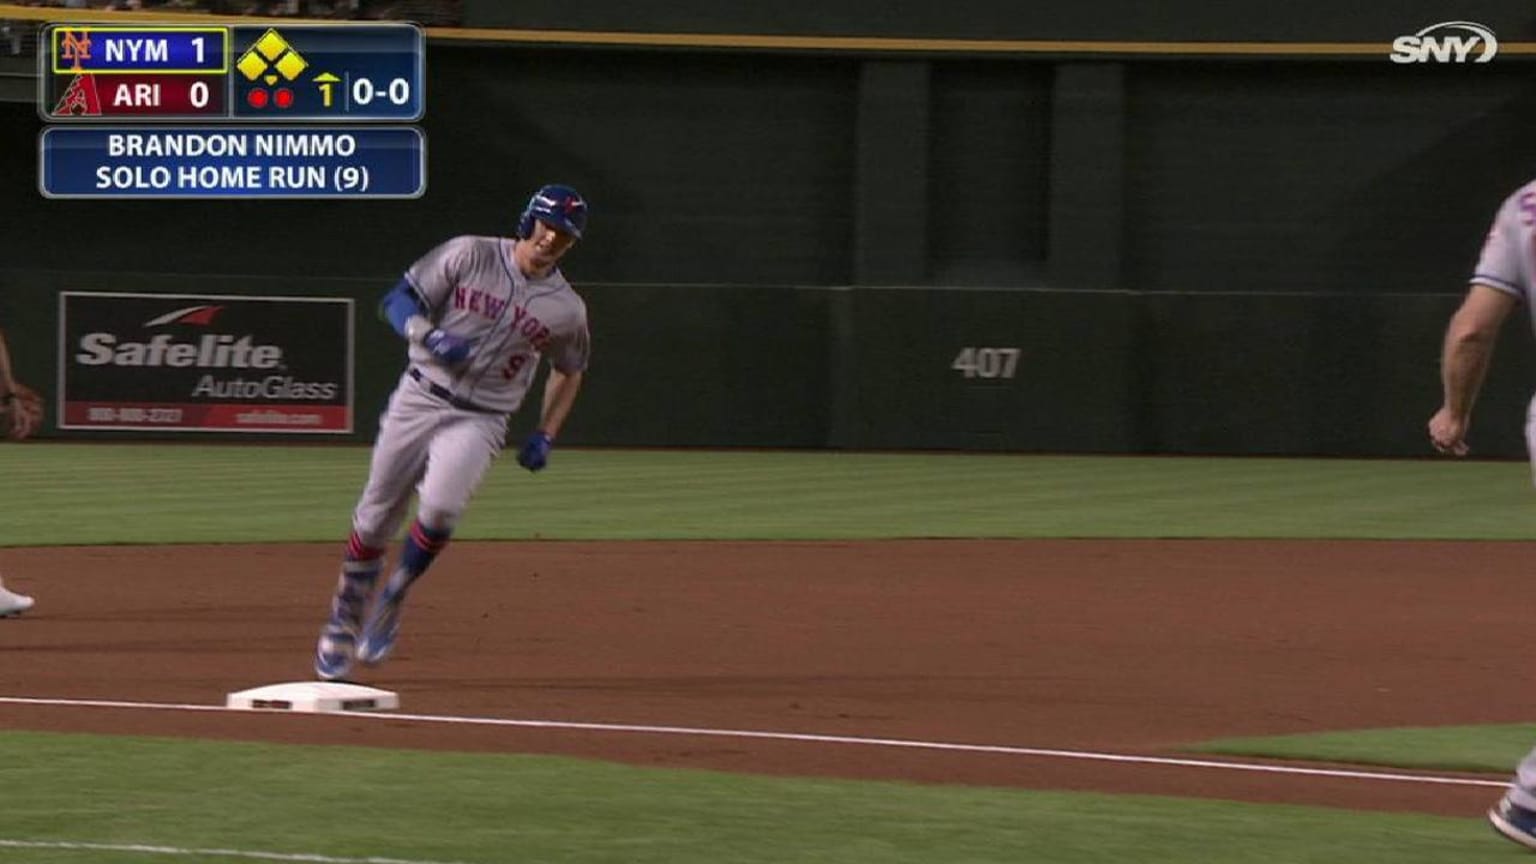 New York Mets news: Brandon Nimmo leads off Subway Series with monster shot  (Video)